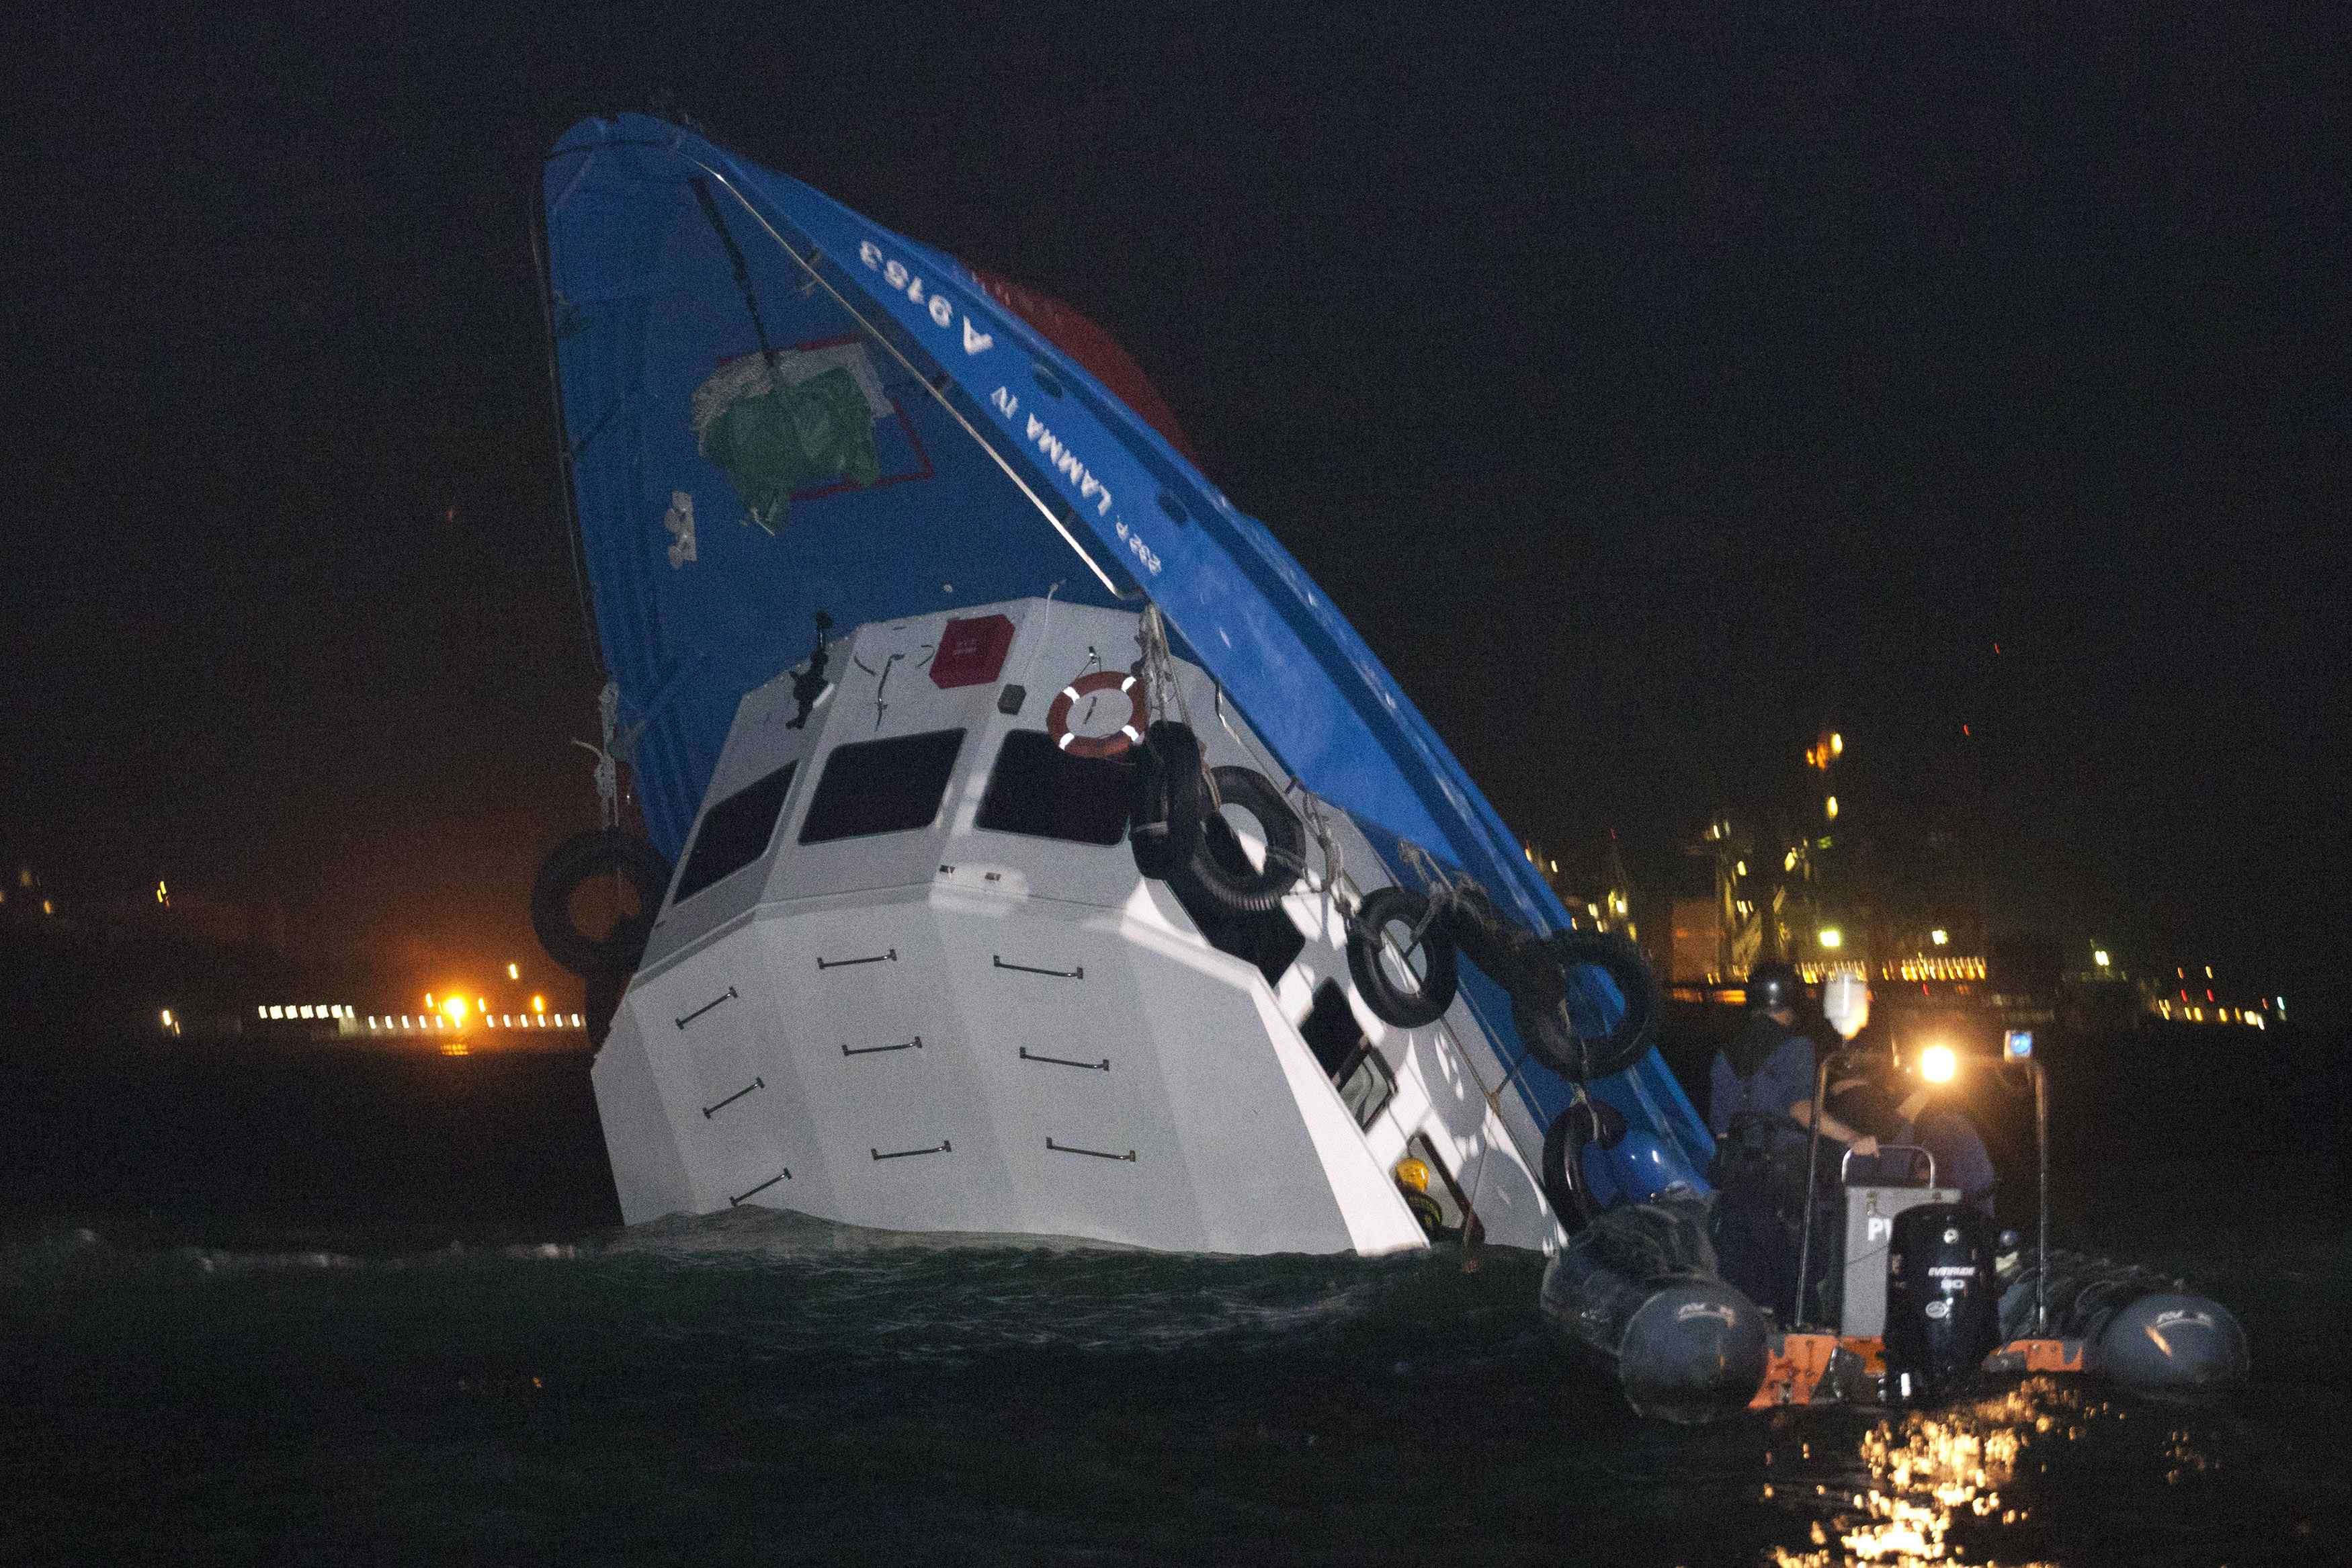 Rescuers approach the Lamma IV after the tragic collision on October 1, 2012. Photo: Reuters